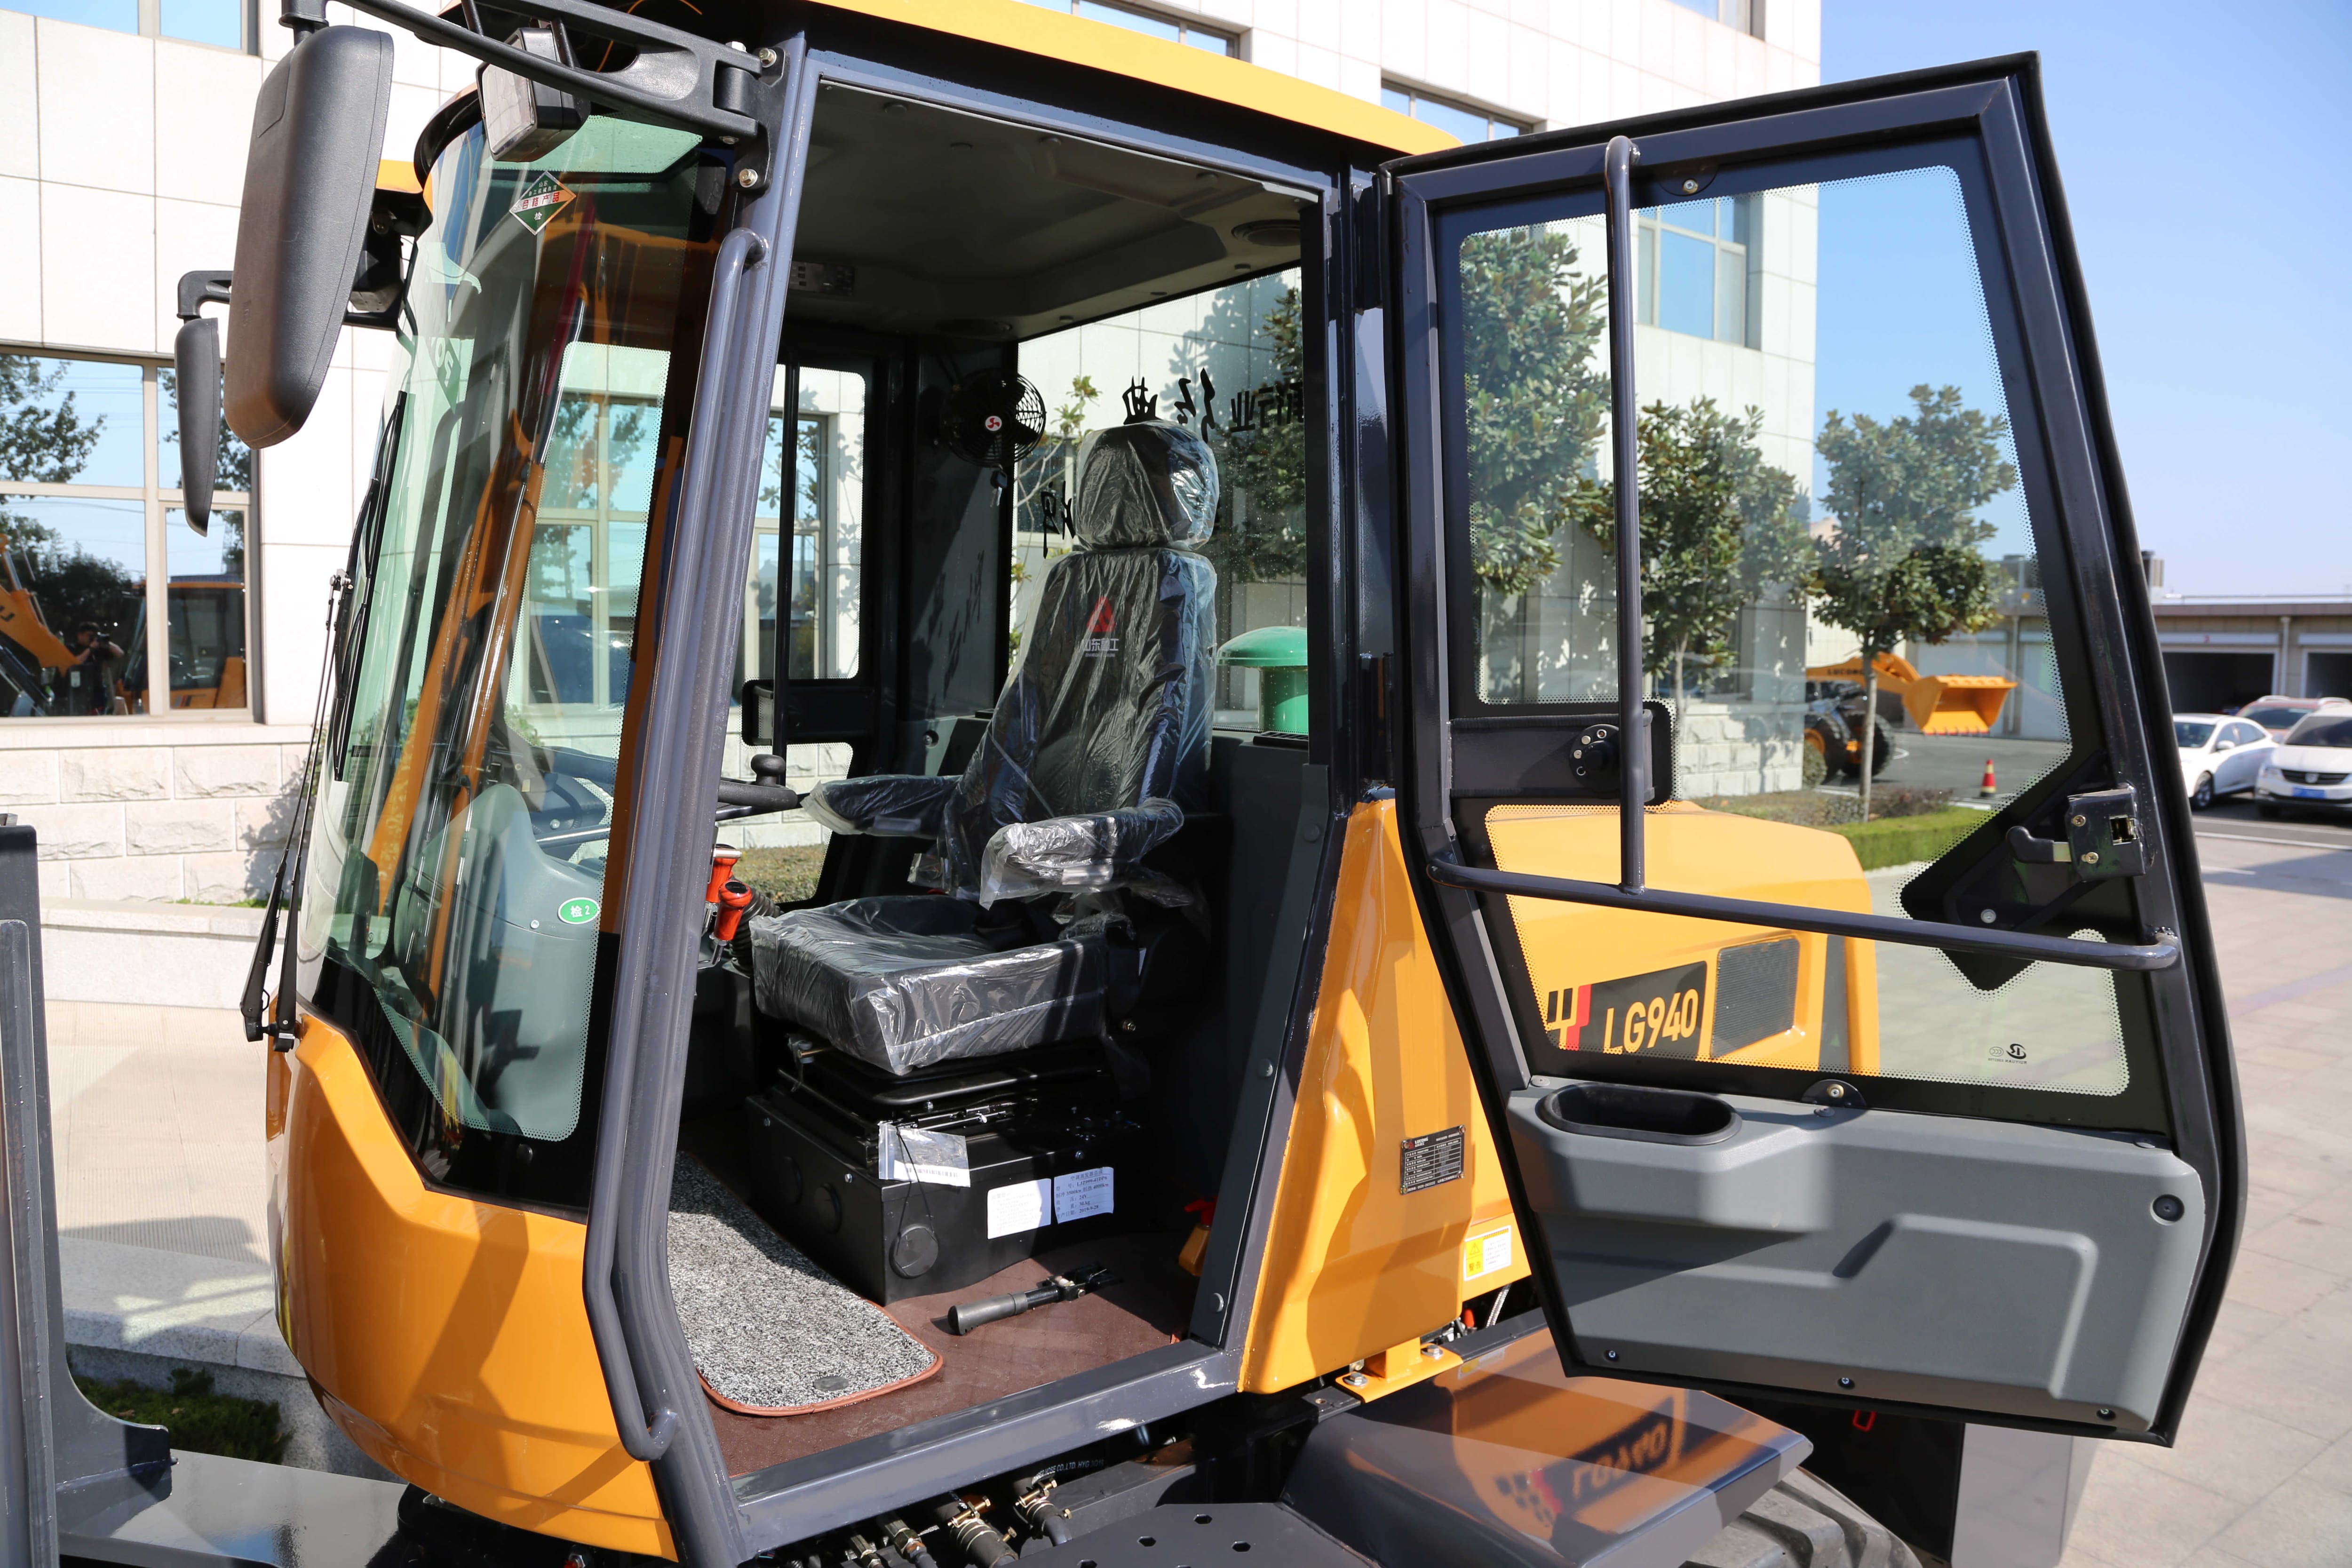 LUGONG LG940 Cost-effective Compact Wheel Loader For Sale For Construction Site